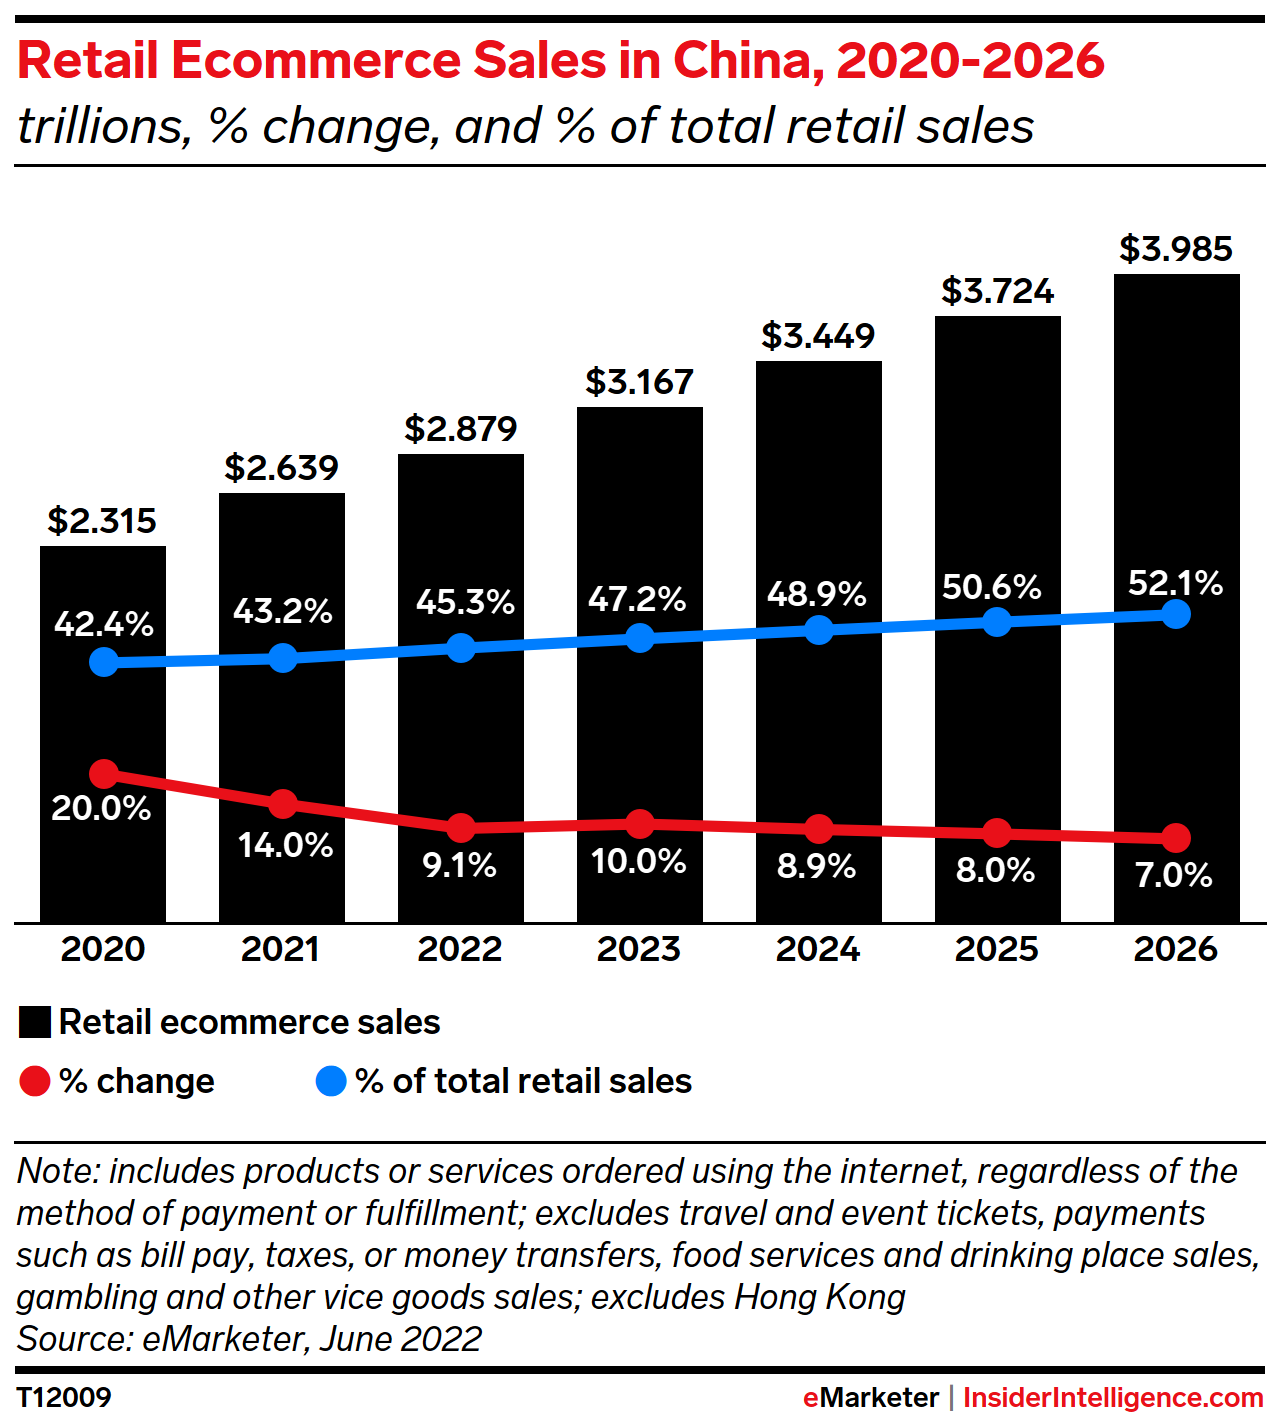 Retail Ecommerce Sales in China, 2020-2026 (trillions, % change, and % of total retail sales)